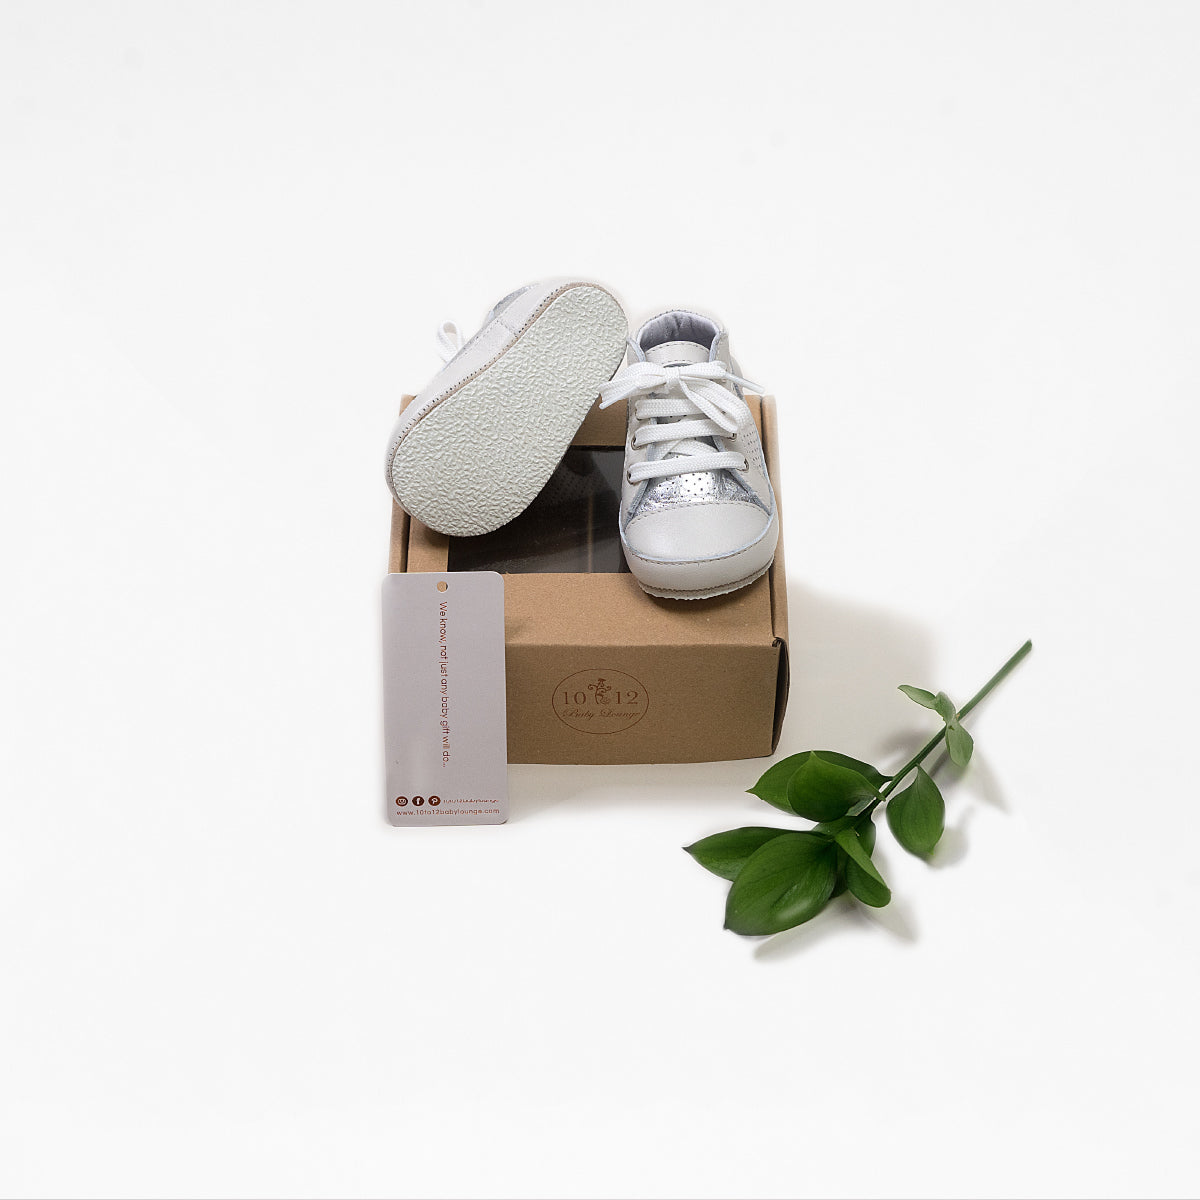 Baby Baller Sneakers - Silver - Product Shot with the Box1